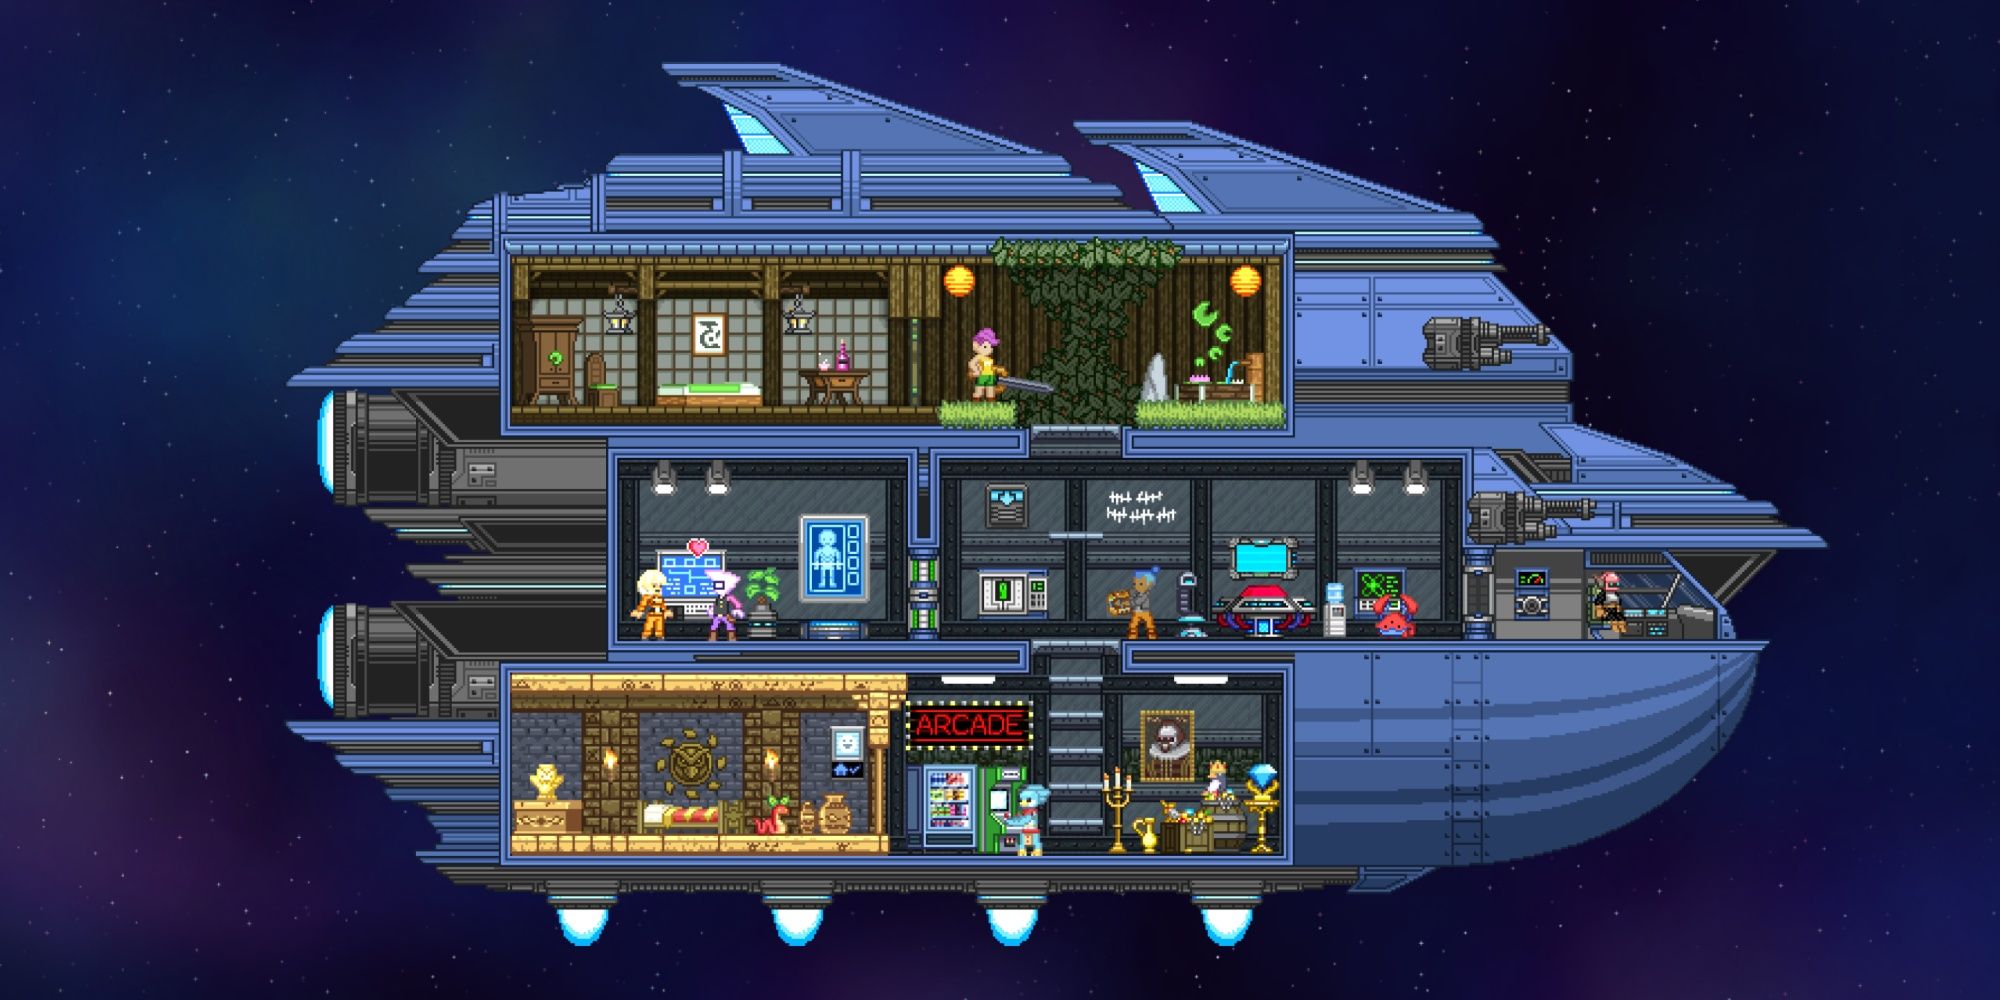 Starbound's simple art style allows for frequent, substantial updates.